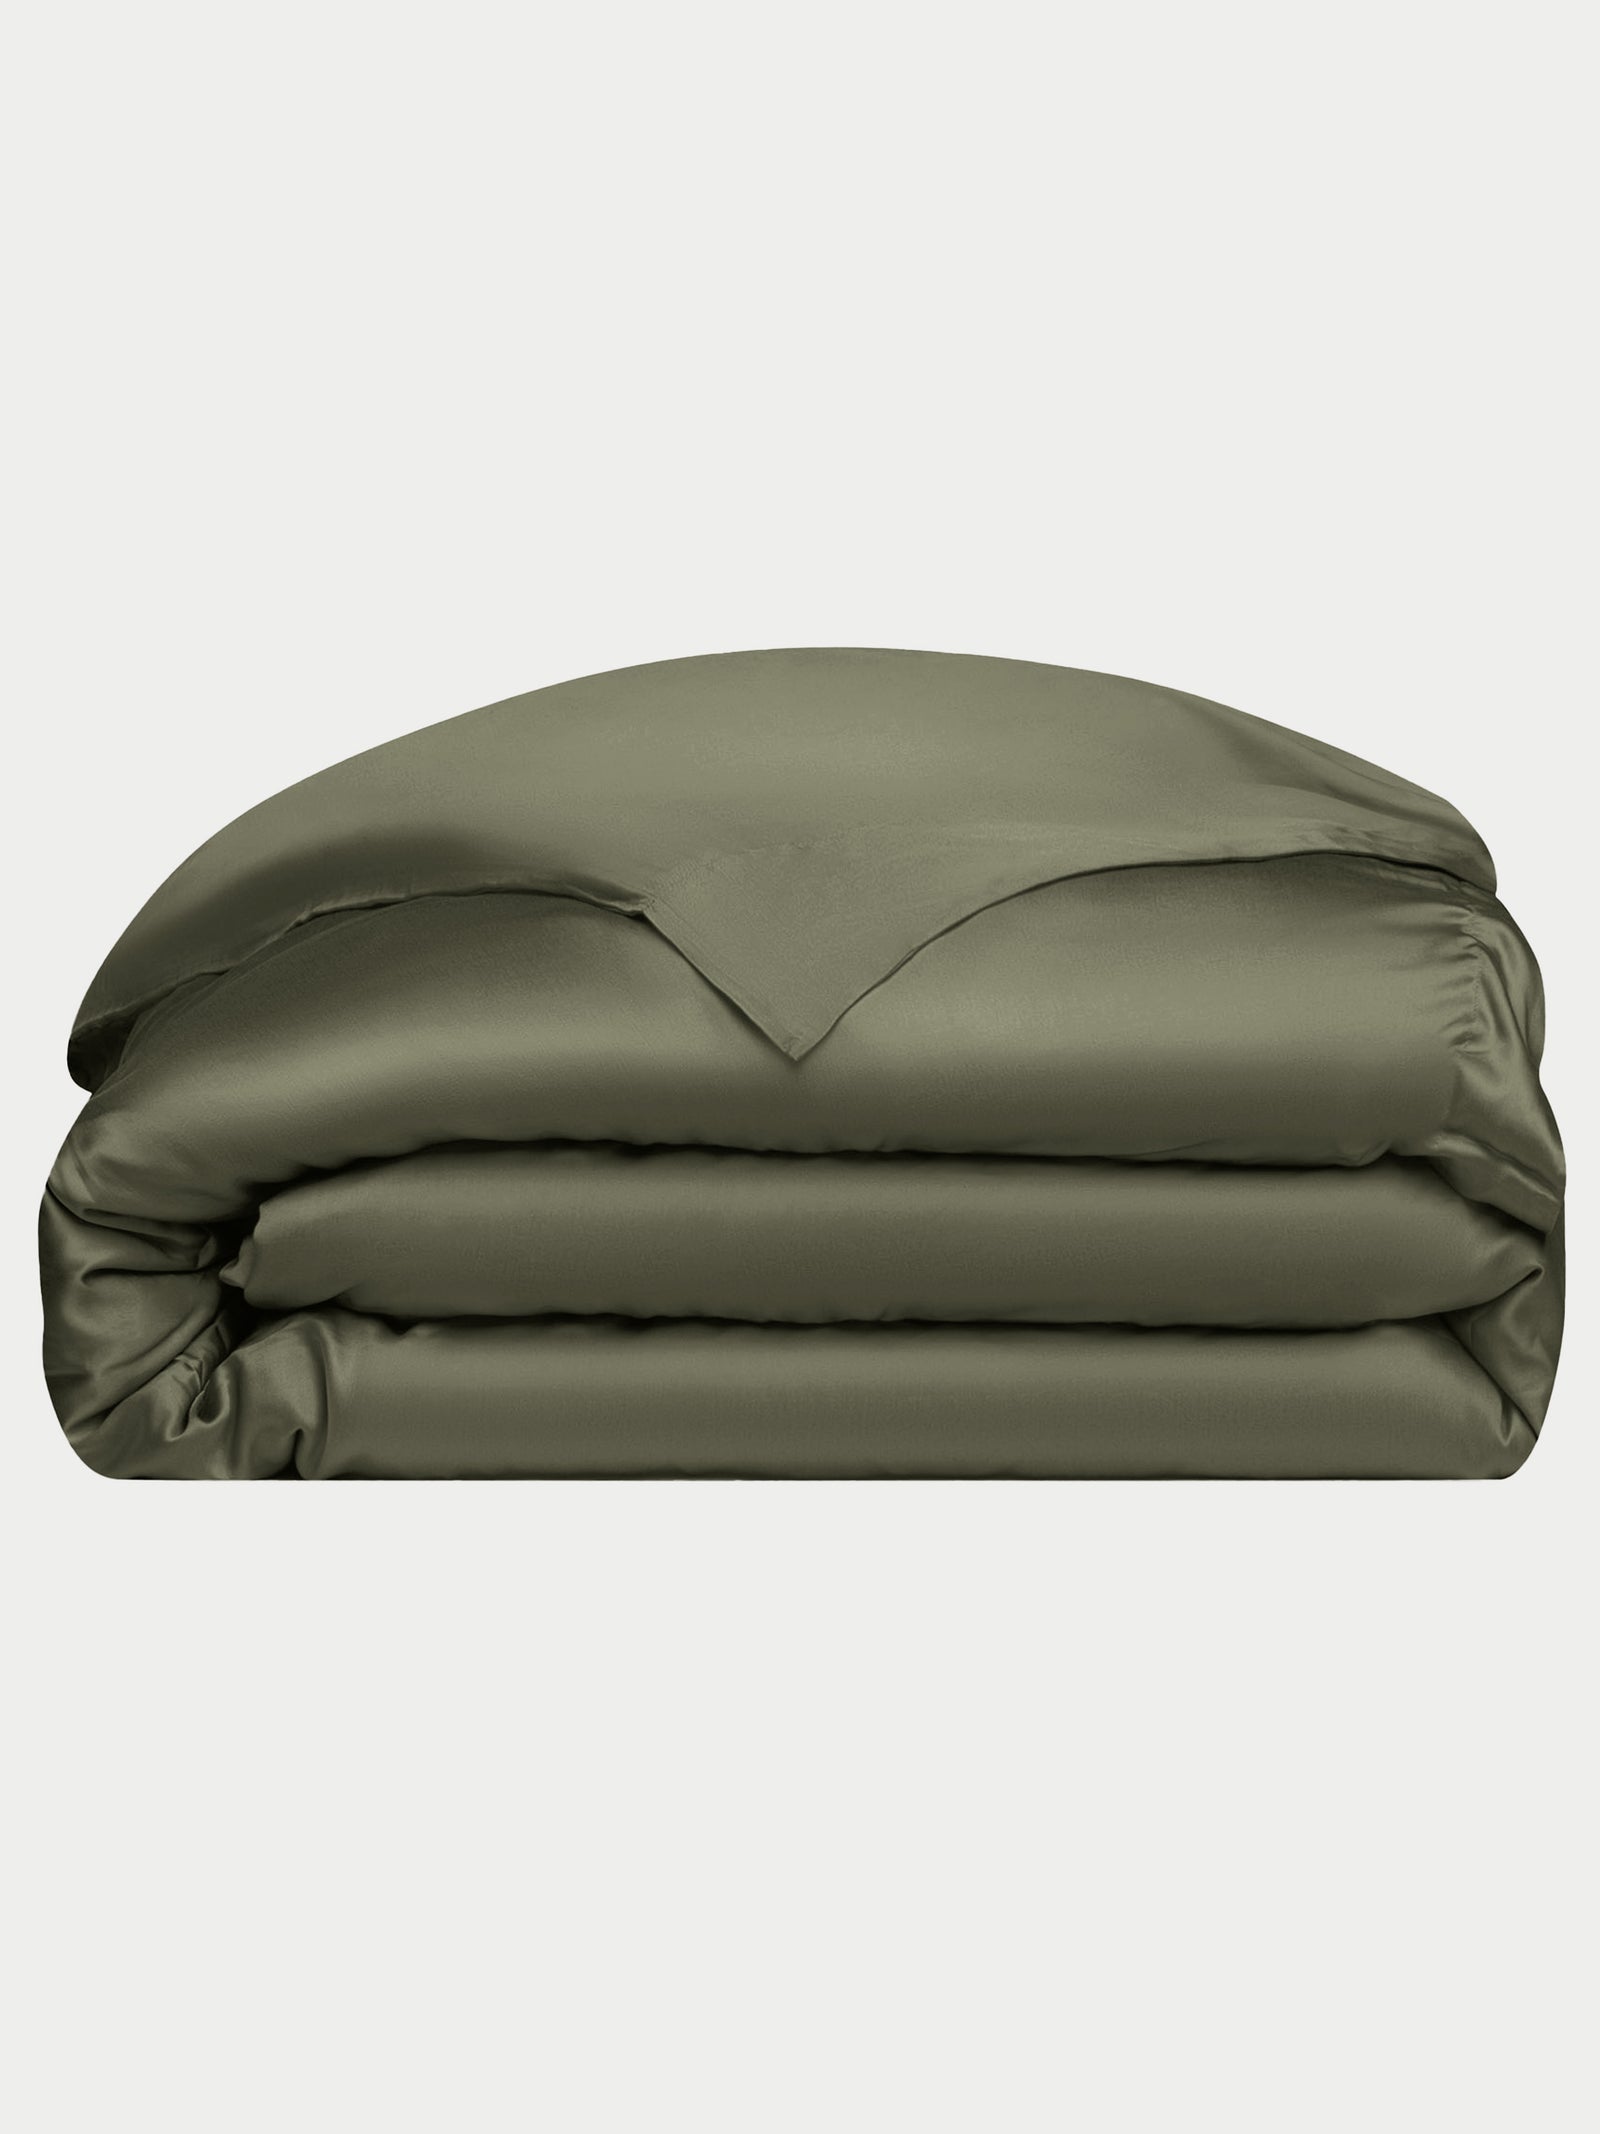 Olive duvet cover folded with white background 